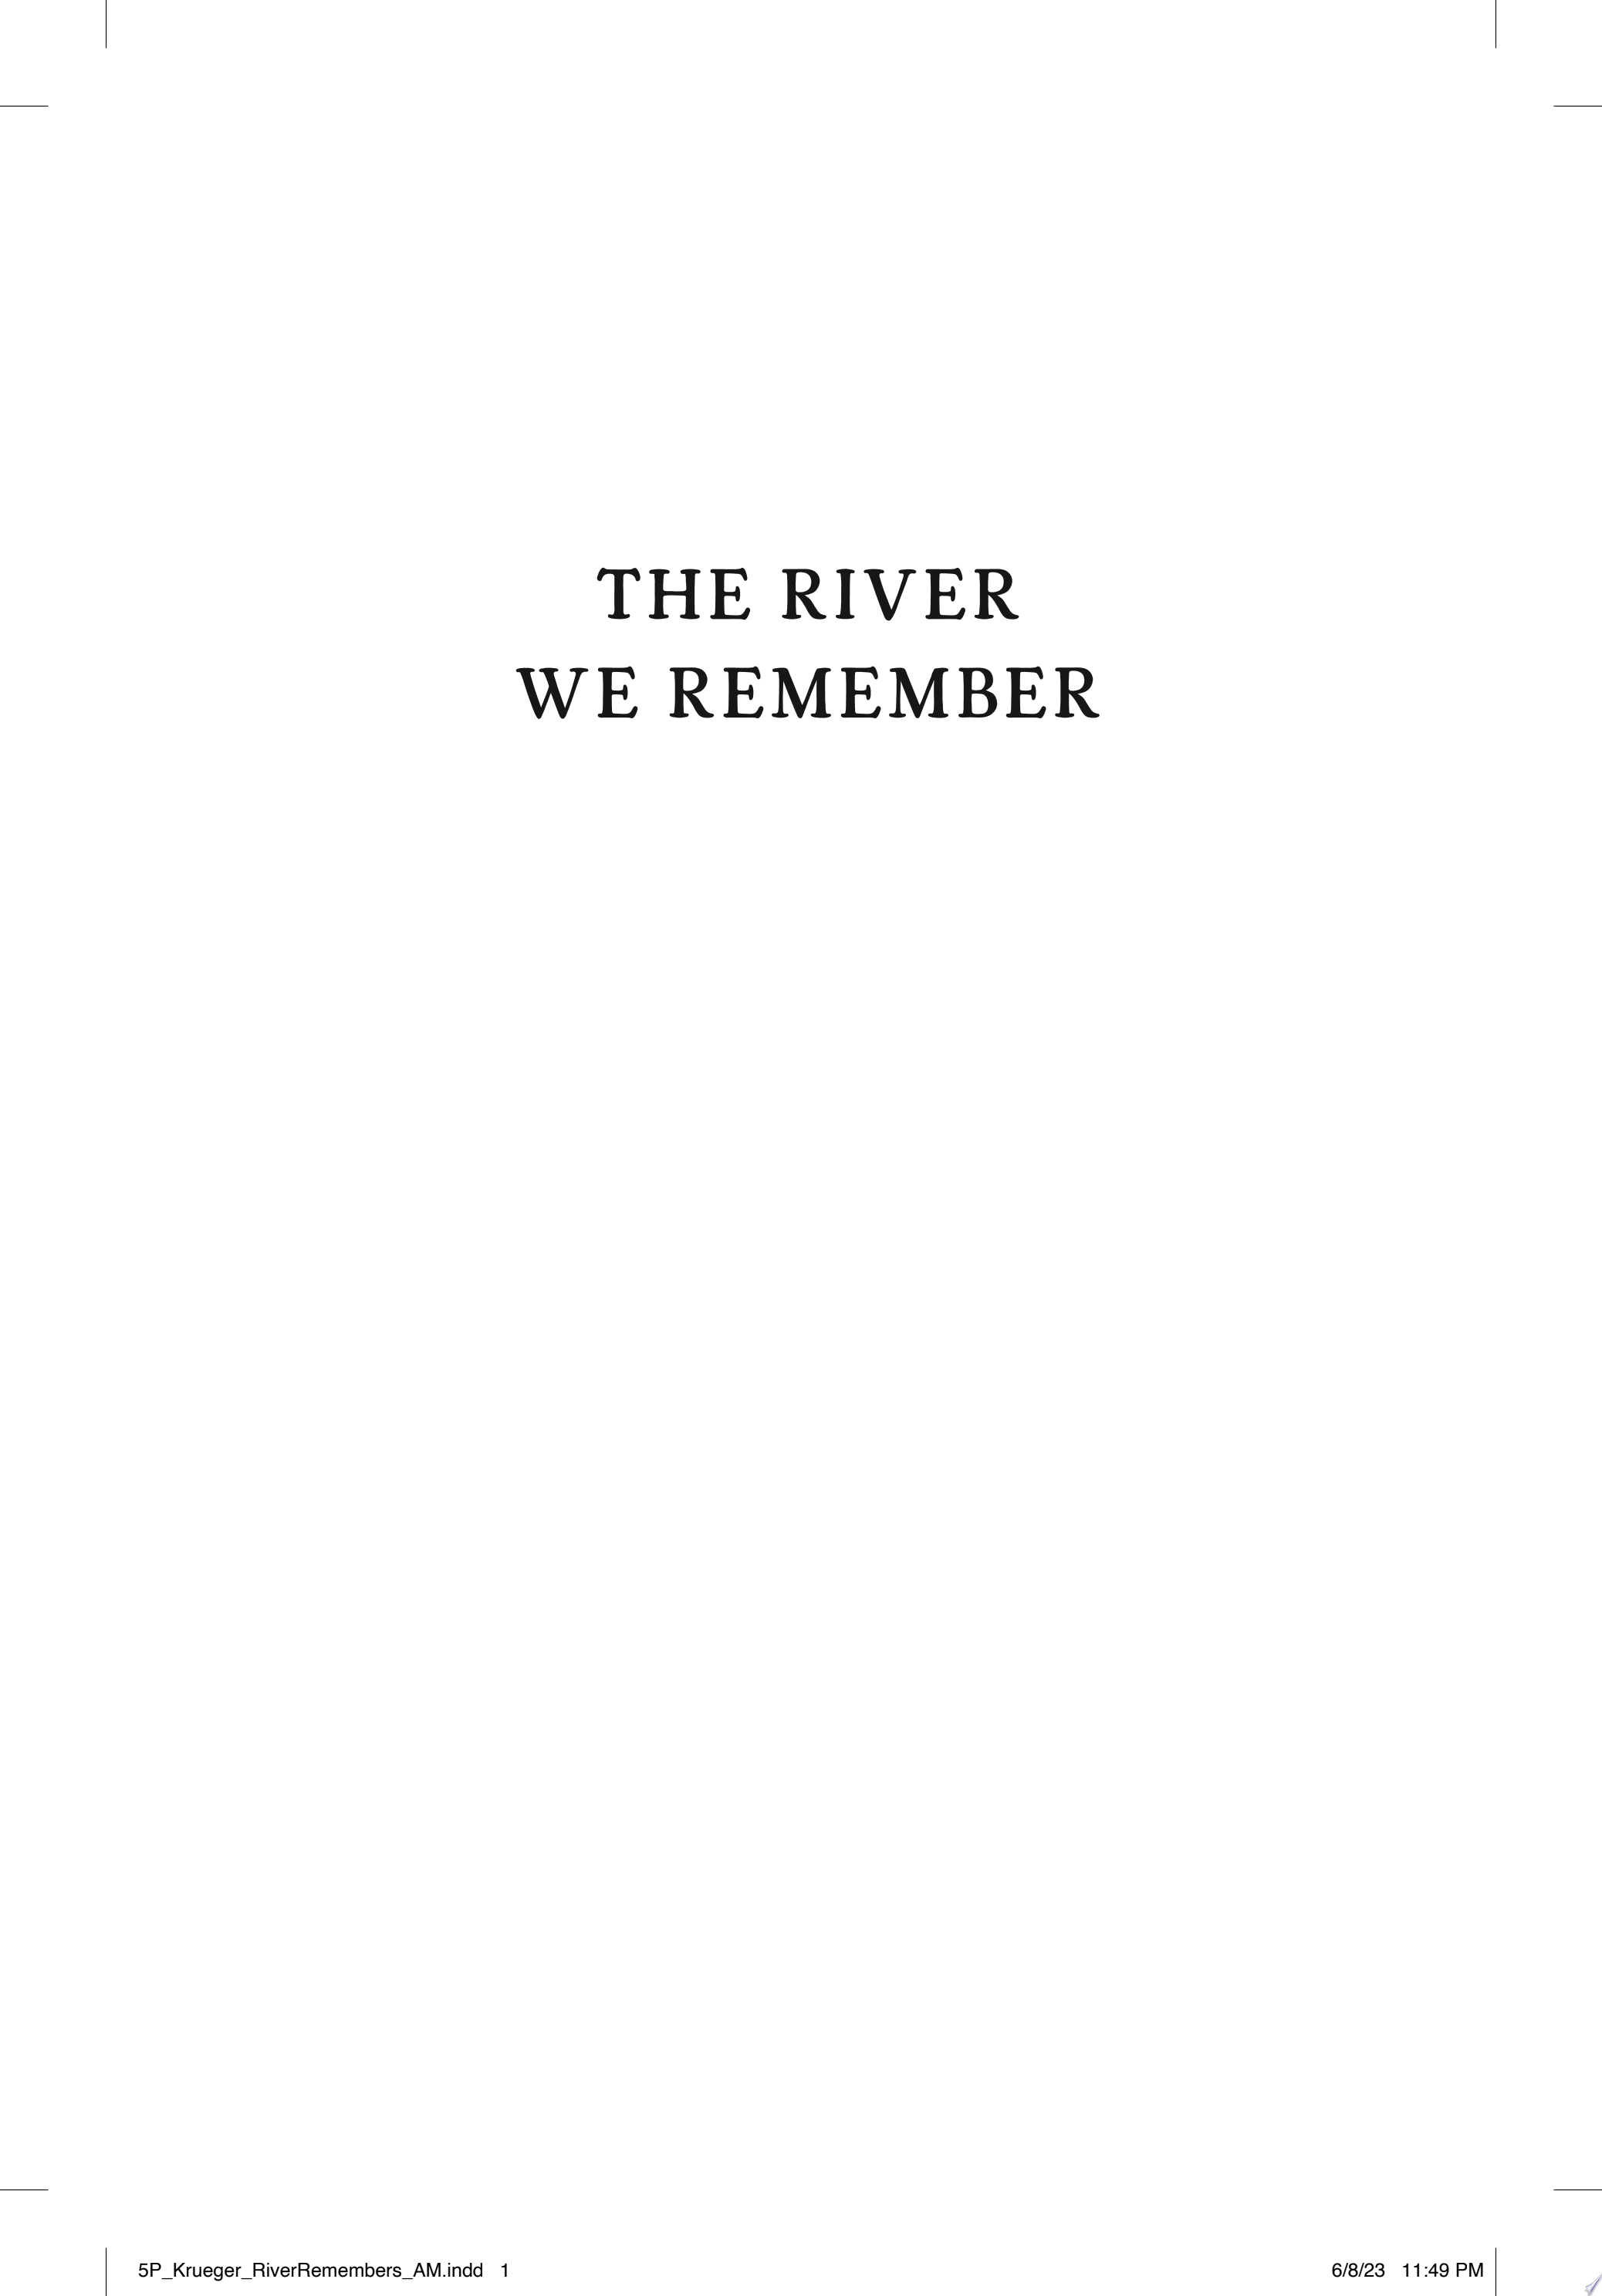 Image for "The River We Remember"